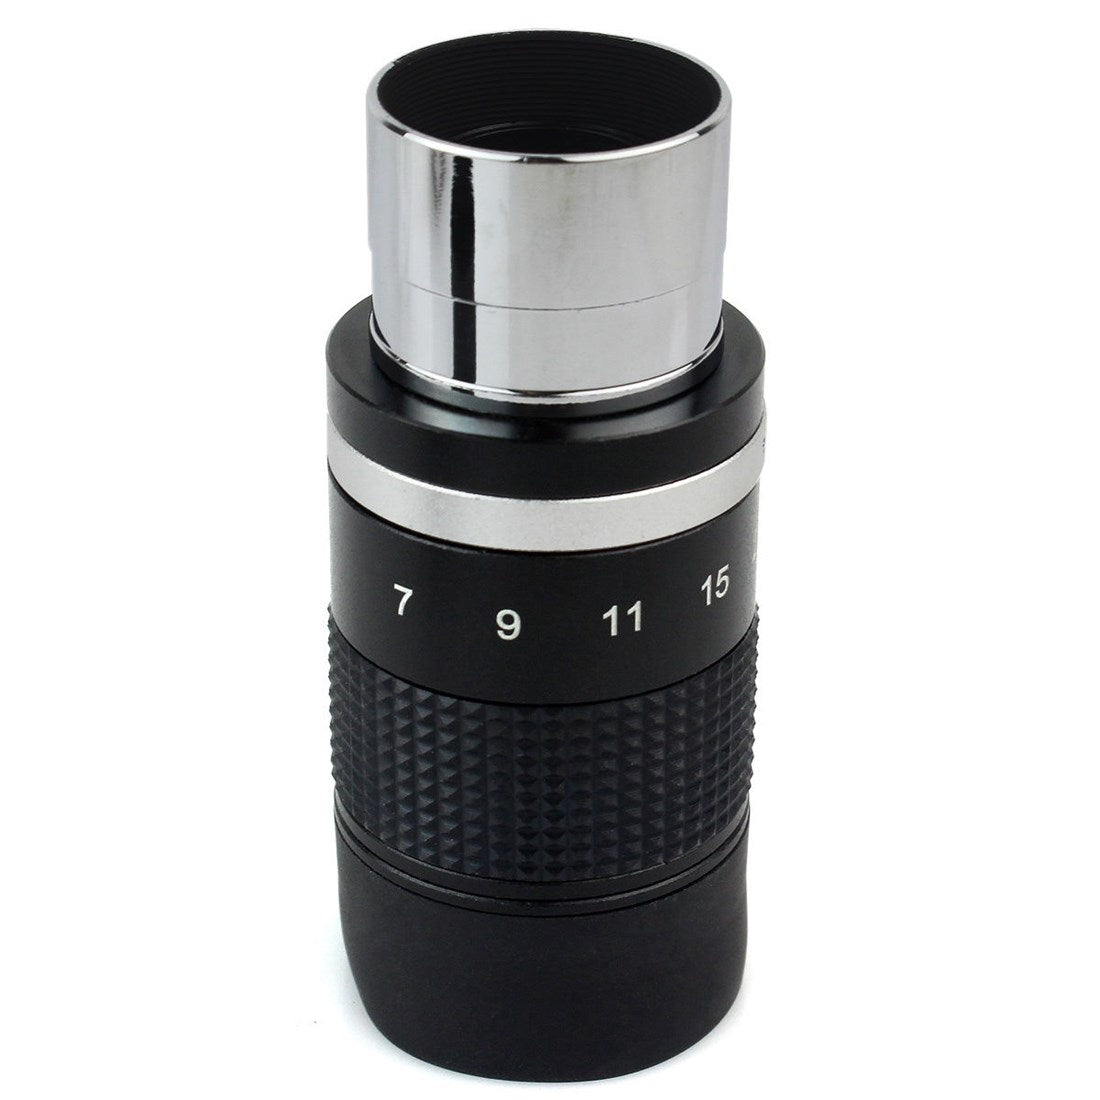 Telescope Lens, Coating Astronomical Telescope1.25 Inch 31.7 Mm Interfac  7‑21mm Continuous Zoom Eyepiece,Monical Eyepiece Telescope for Adults